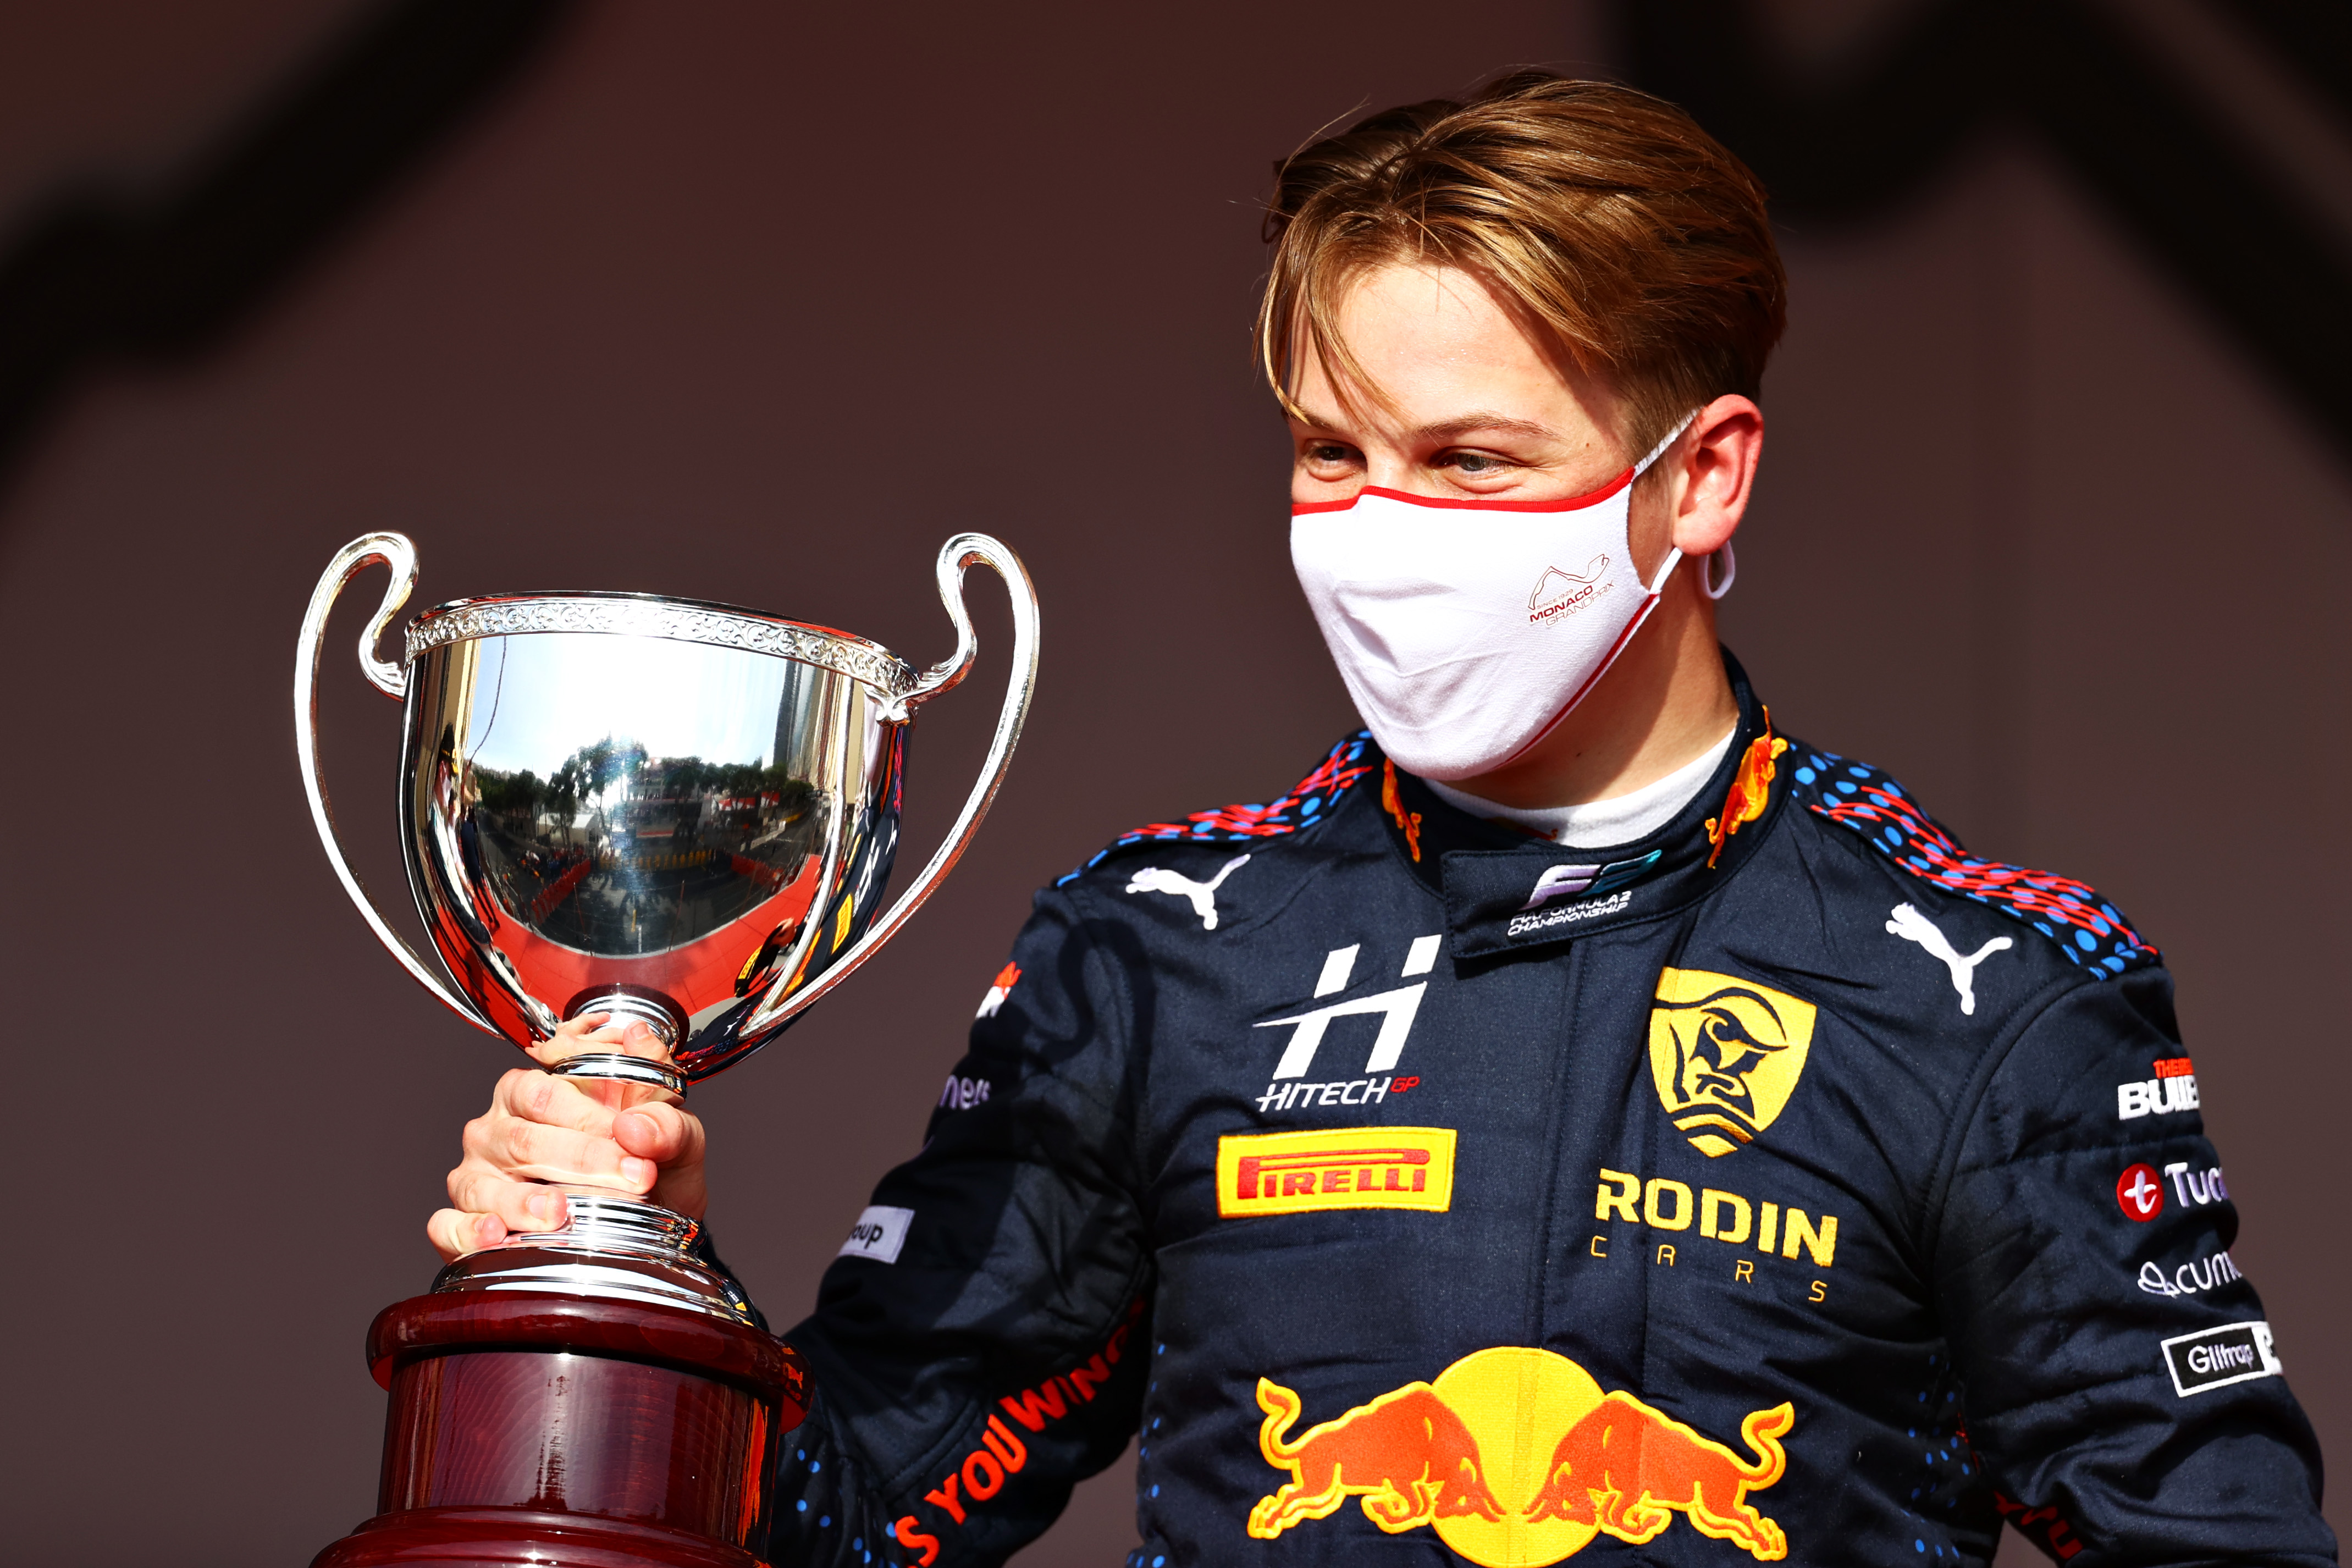 Formula 2 on X: Welcome back to the Monaco podium, @Charles_Pic1! He  claimed the Sprint trophy here back in 2011, now he gets to enjoy the same  silverware as @damsracing boss 🏆 #